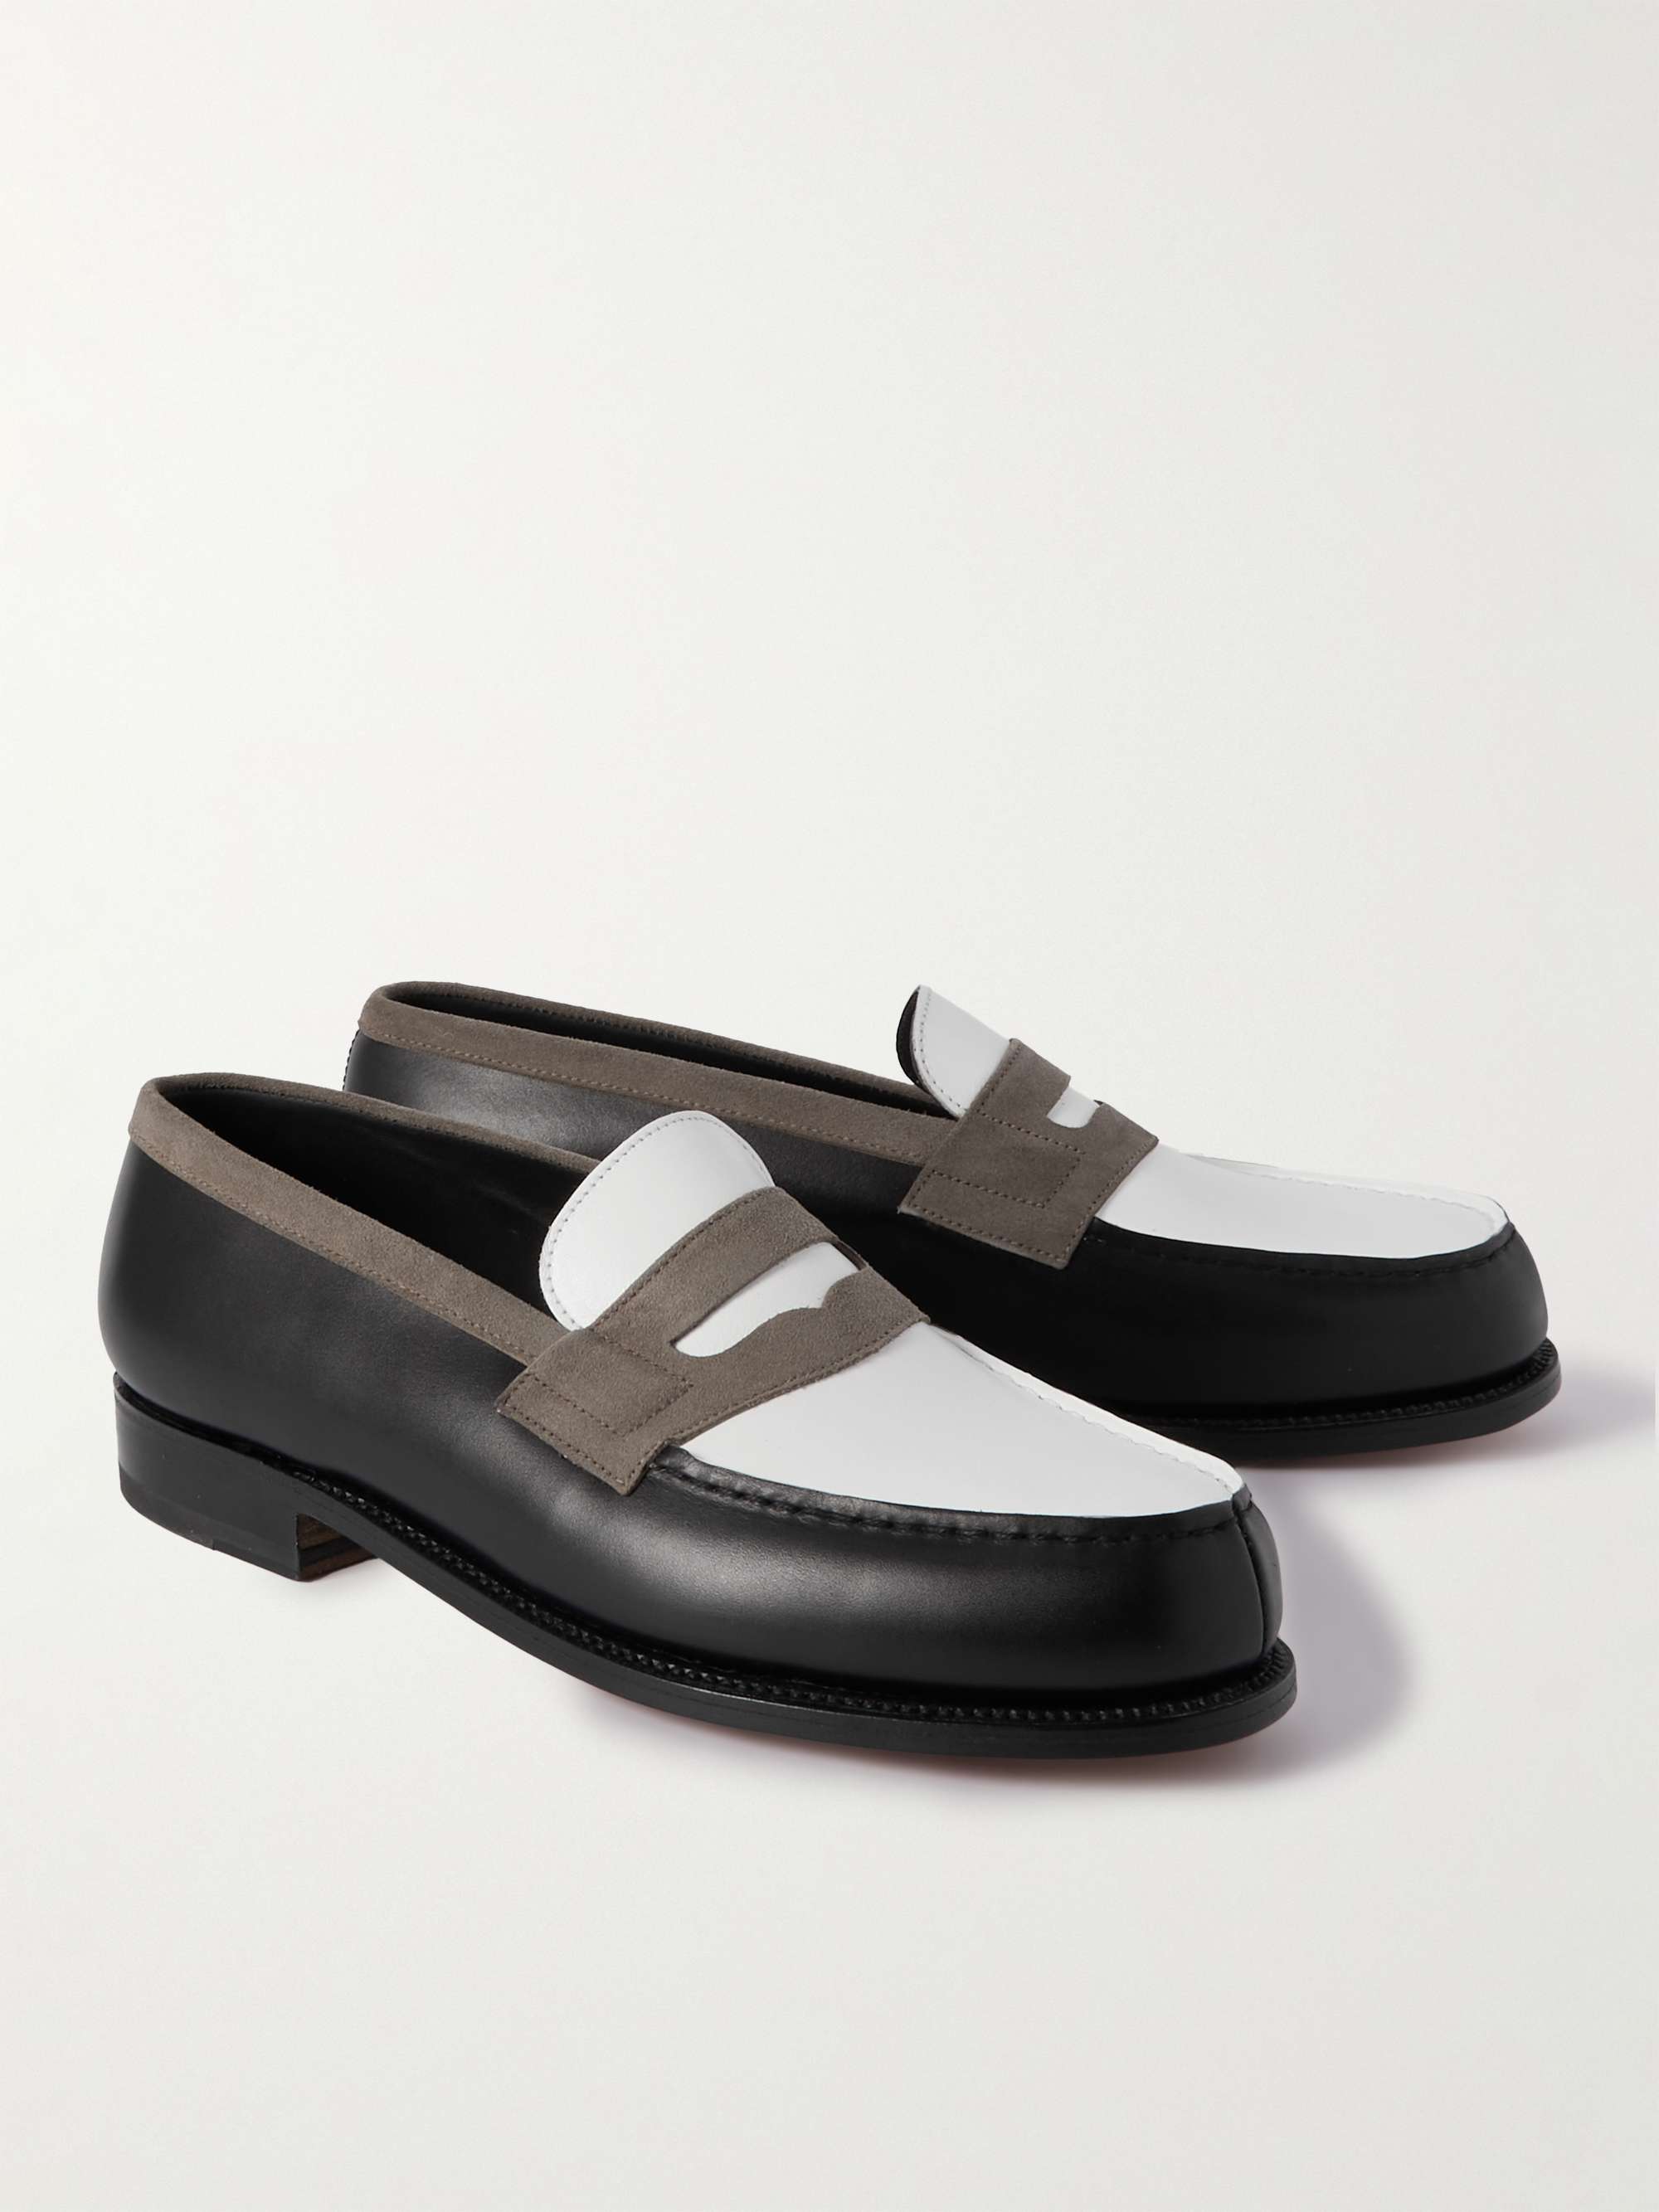 J.M. WESTON 180 Suede-Trimmed Leather Loafers | MR PORTER